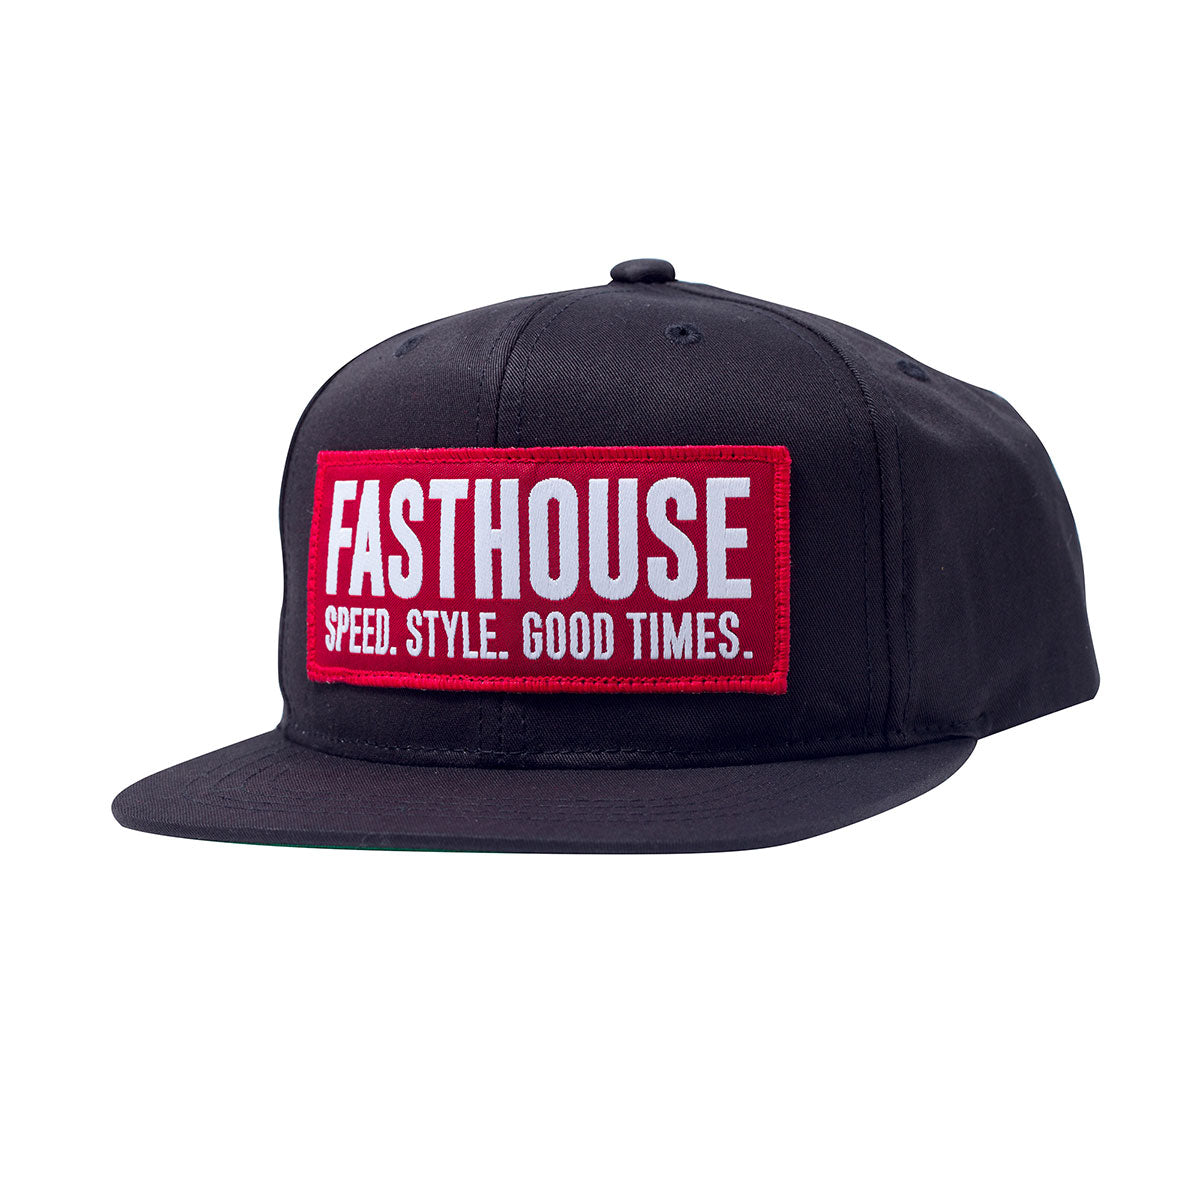 Fasthouse - Blockhouse Youth Hat - Black